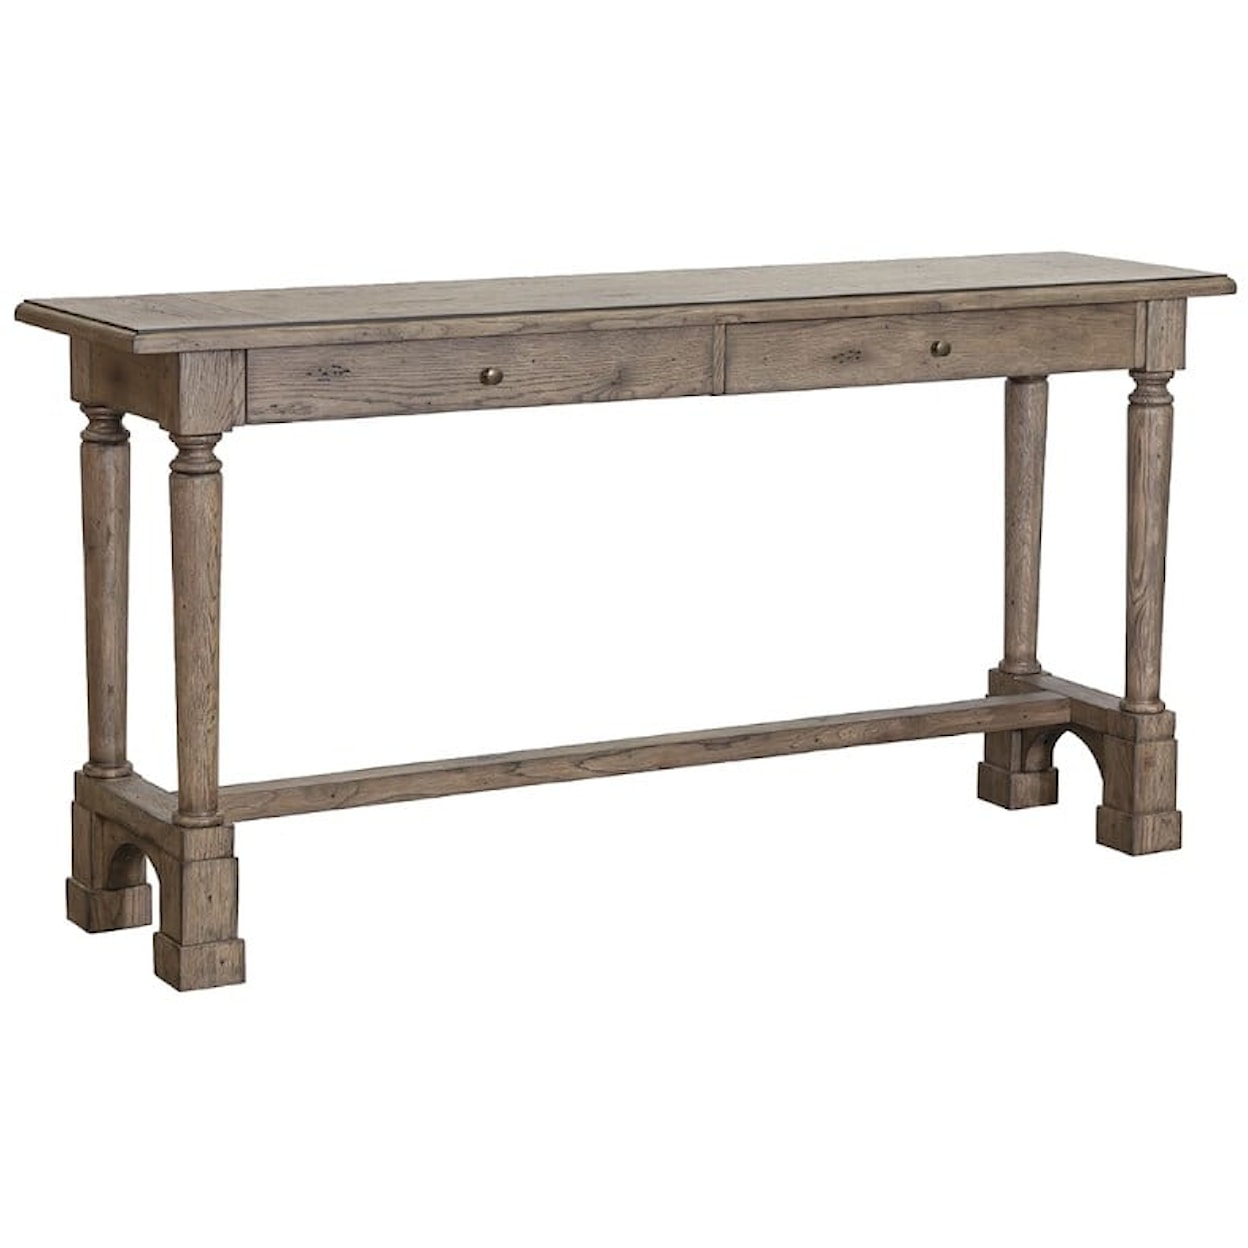 Fairfield Arcadian Collection Arcadian Huntboard Console Table